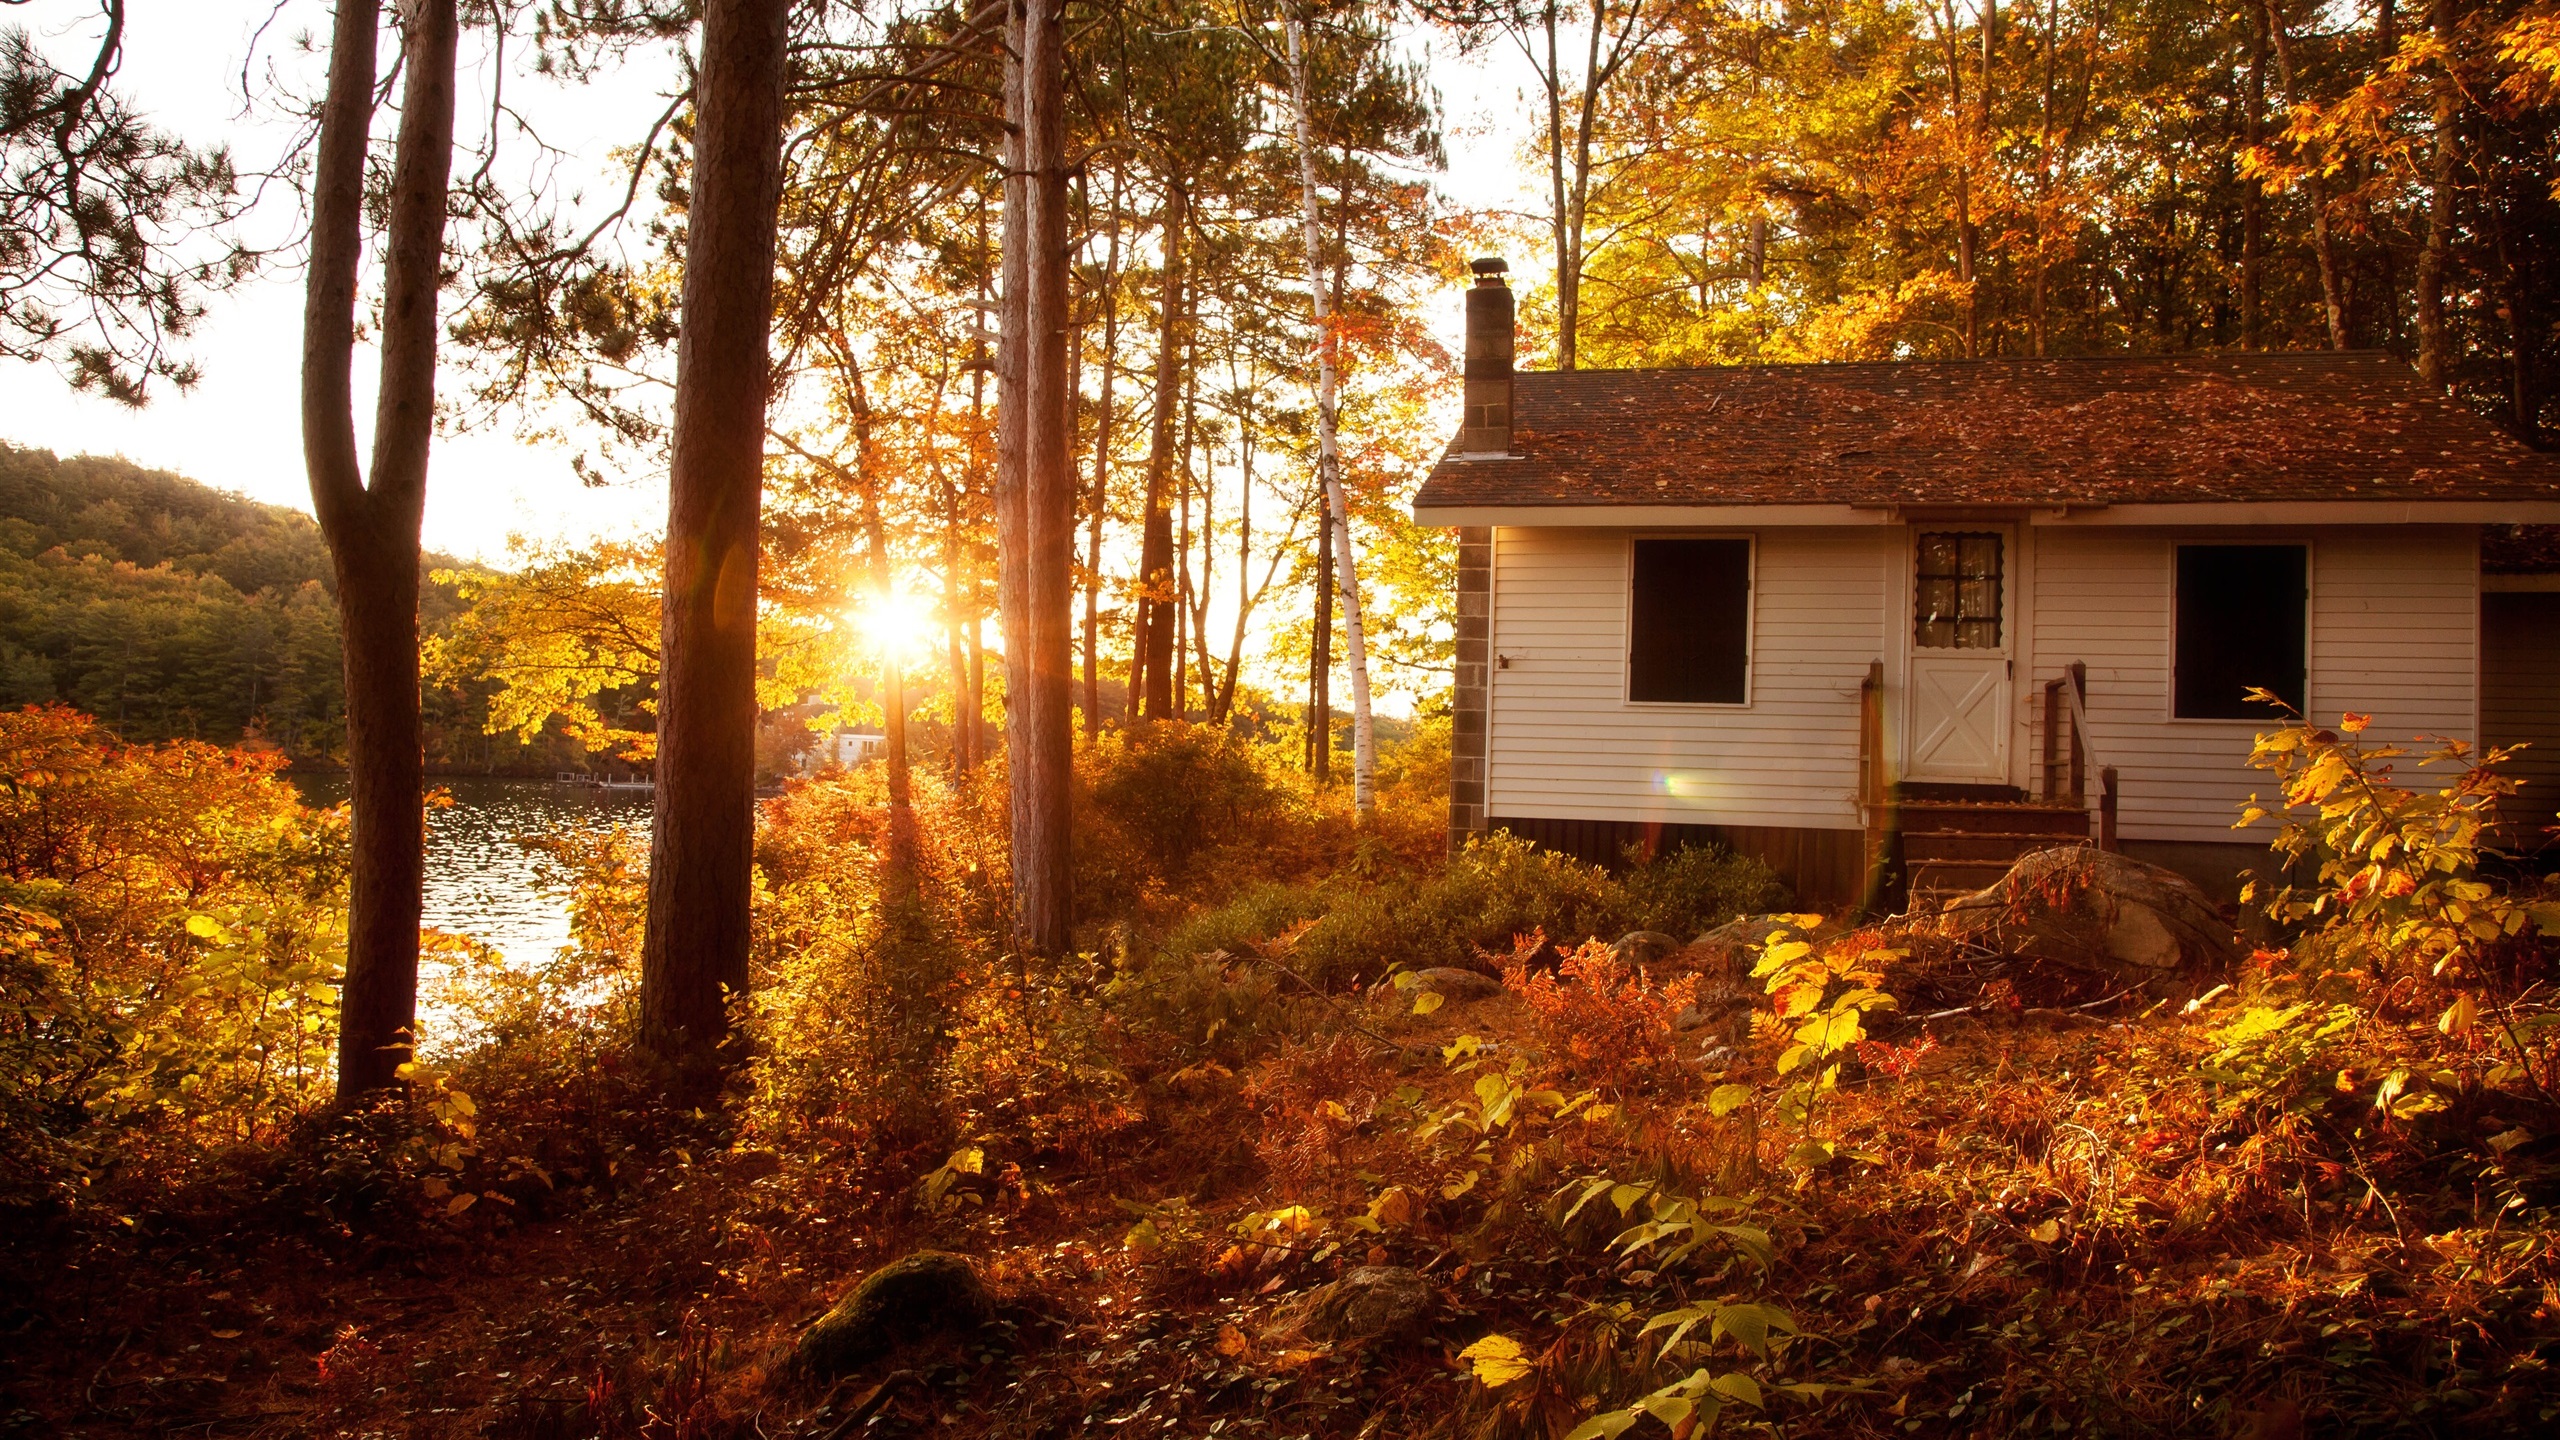 General 2560x1440 house trees plants sunlight fall sunset river forest cabin clear sky fallen leaves orange